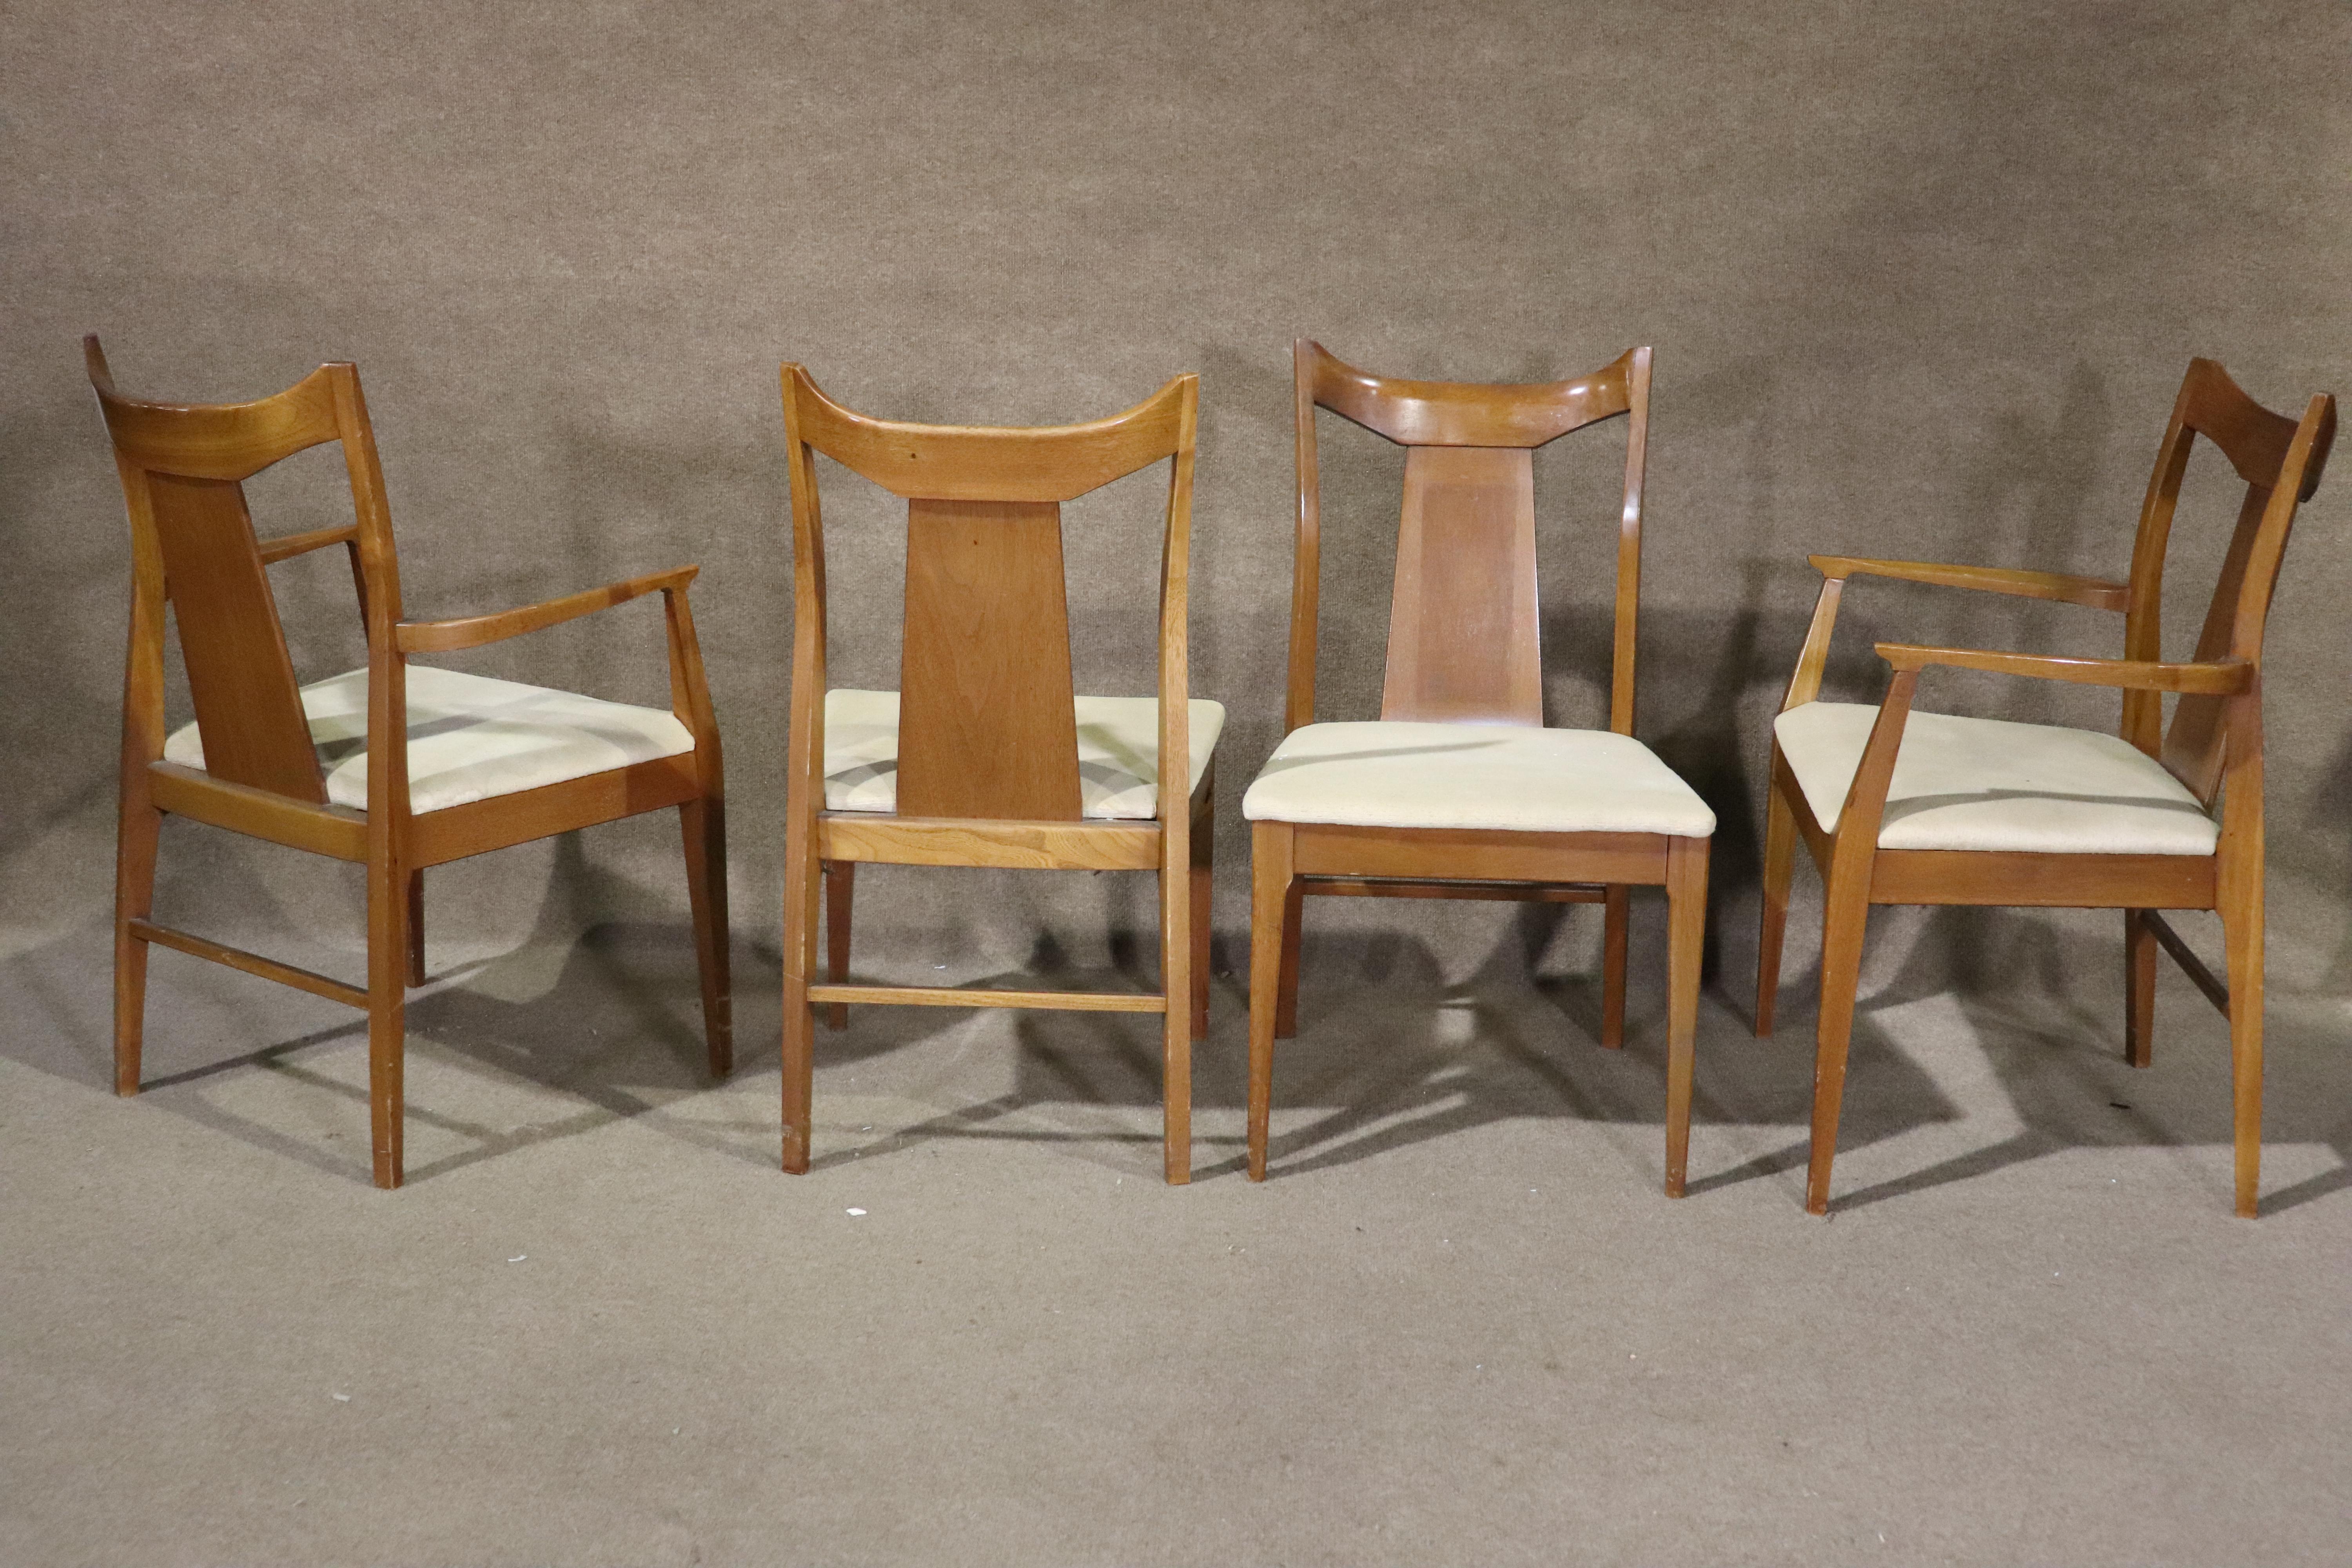 Set of six mid-century modern walnut frame dining chairs. Great vintage style with sculpted frames and tan seats.
Arm chairs: 35.5h, 23w, 22d
Side chairs: 35.5h, 19.5w, 21d
Please confirm location NY or NJ